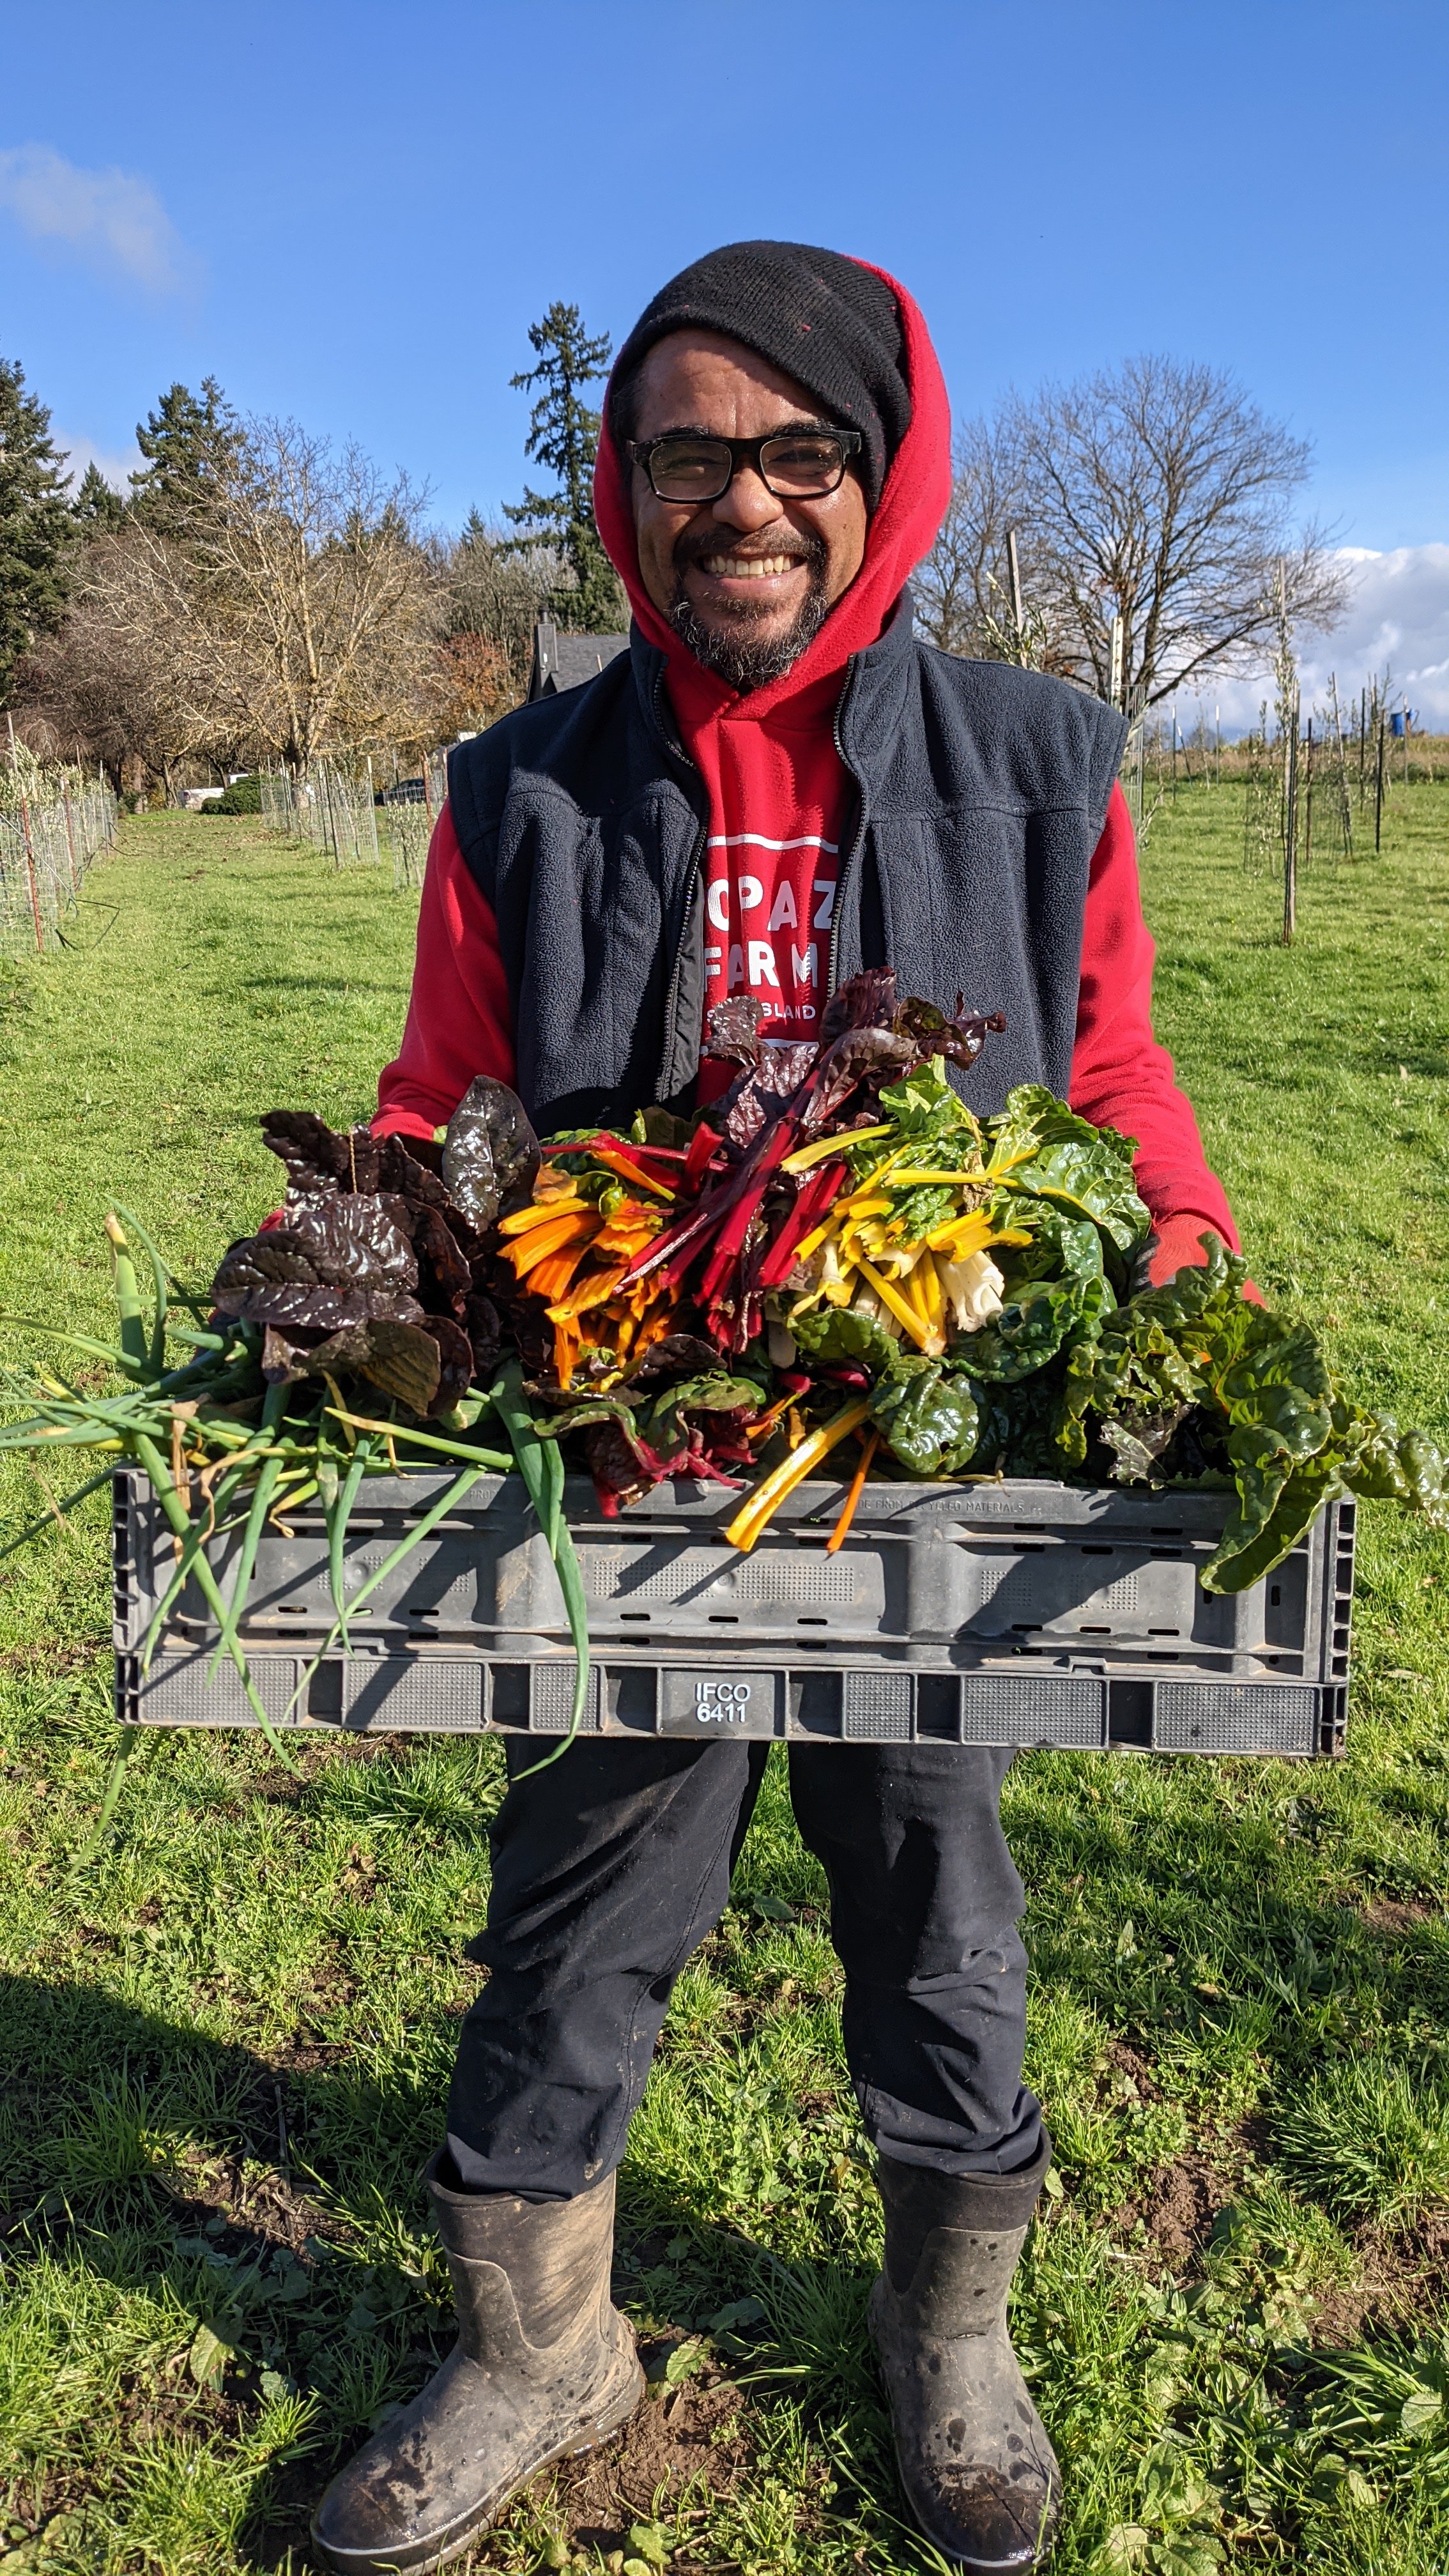  I love this photo. Cuauhtemoc had just picked some greens out of the field during the last week of November, for an employee lunch. One of the many perks of being on the farm, is continuing to be able to pick greens almost year round.  